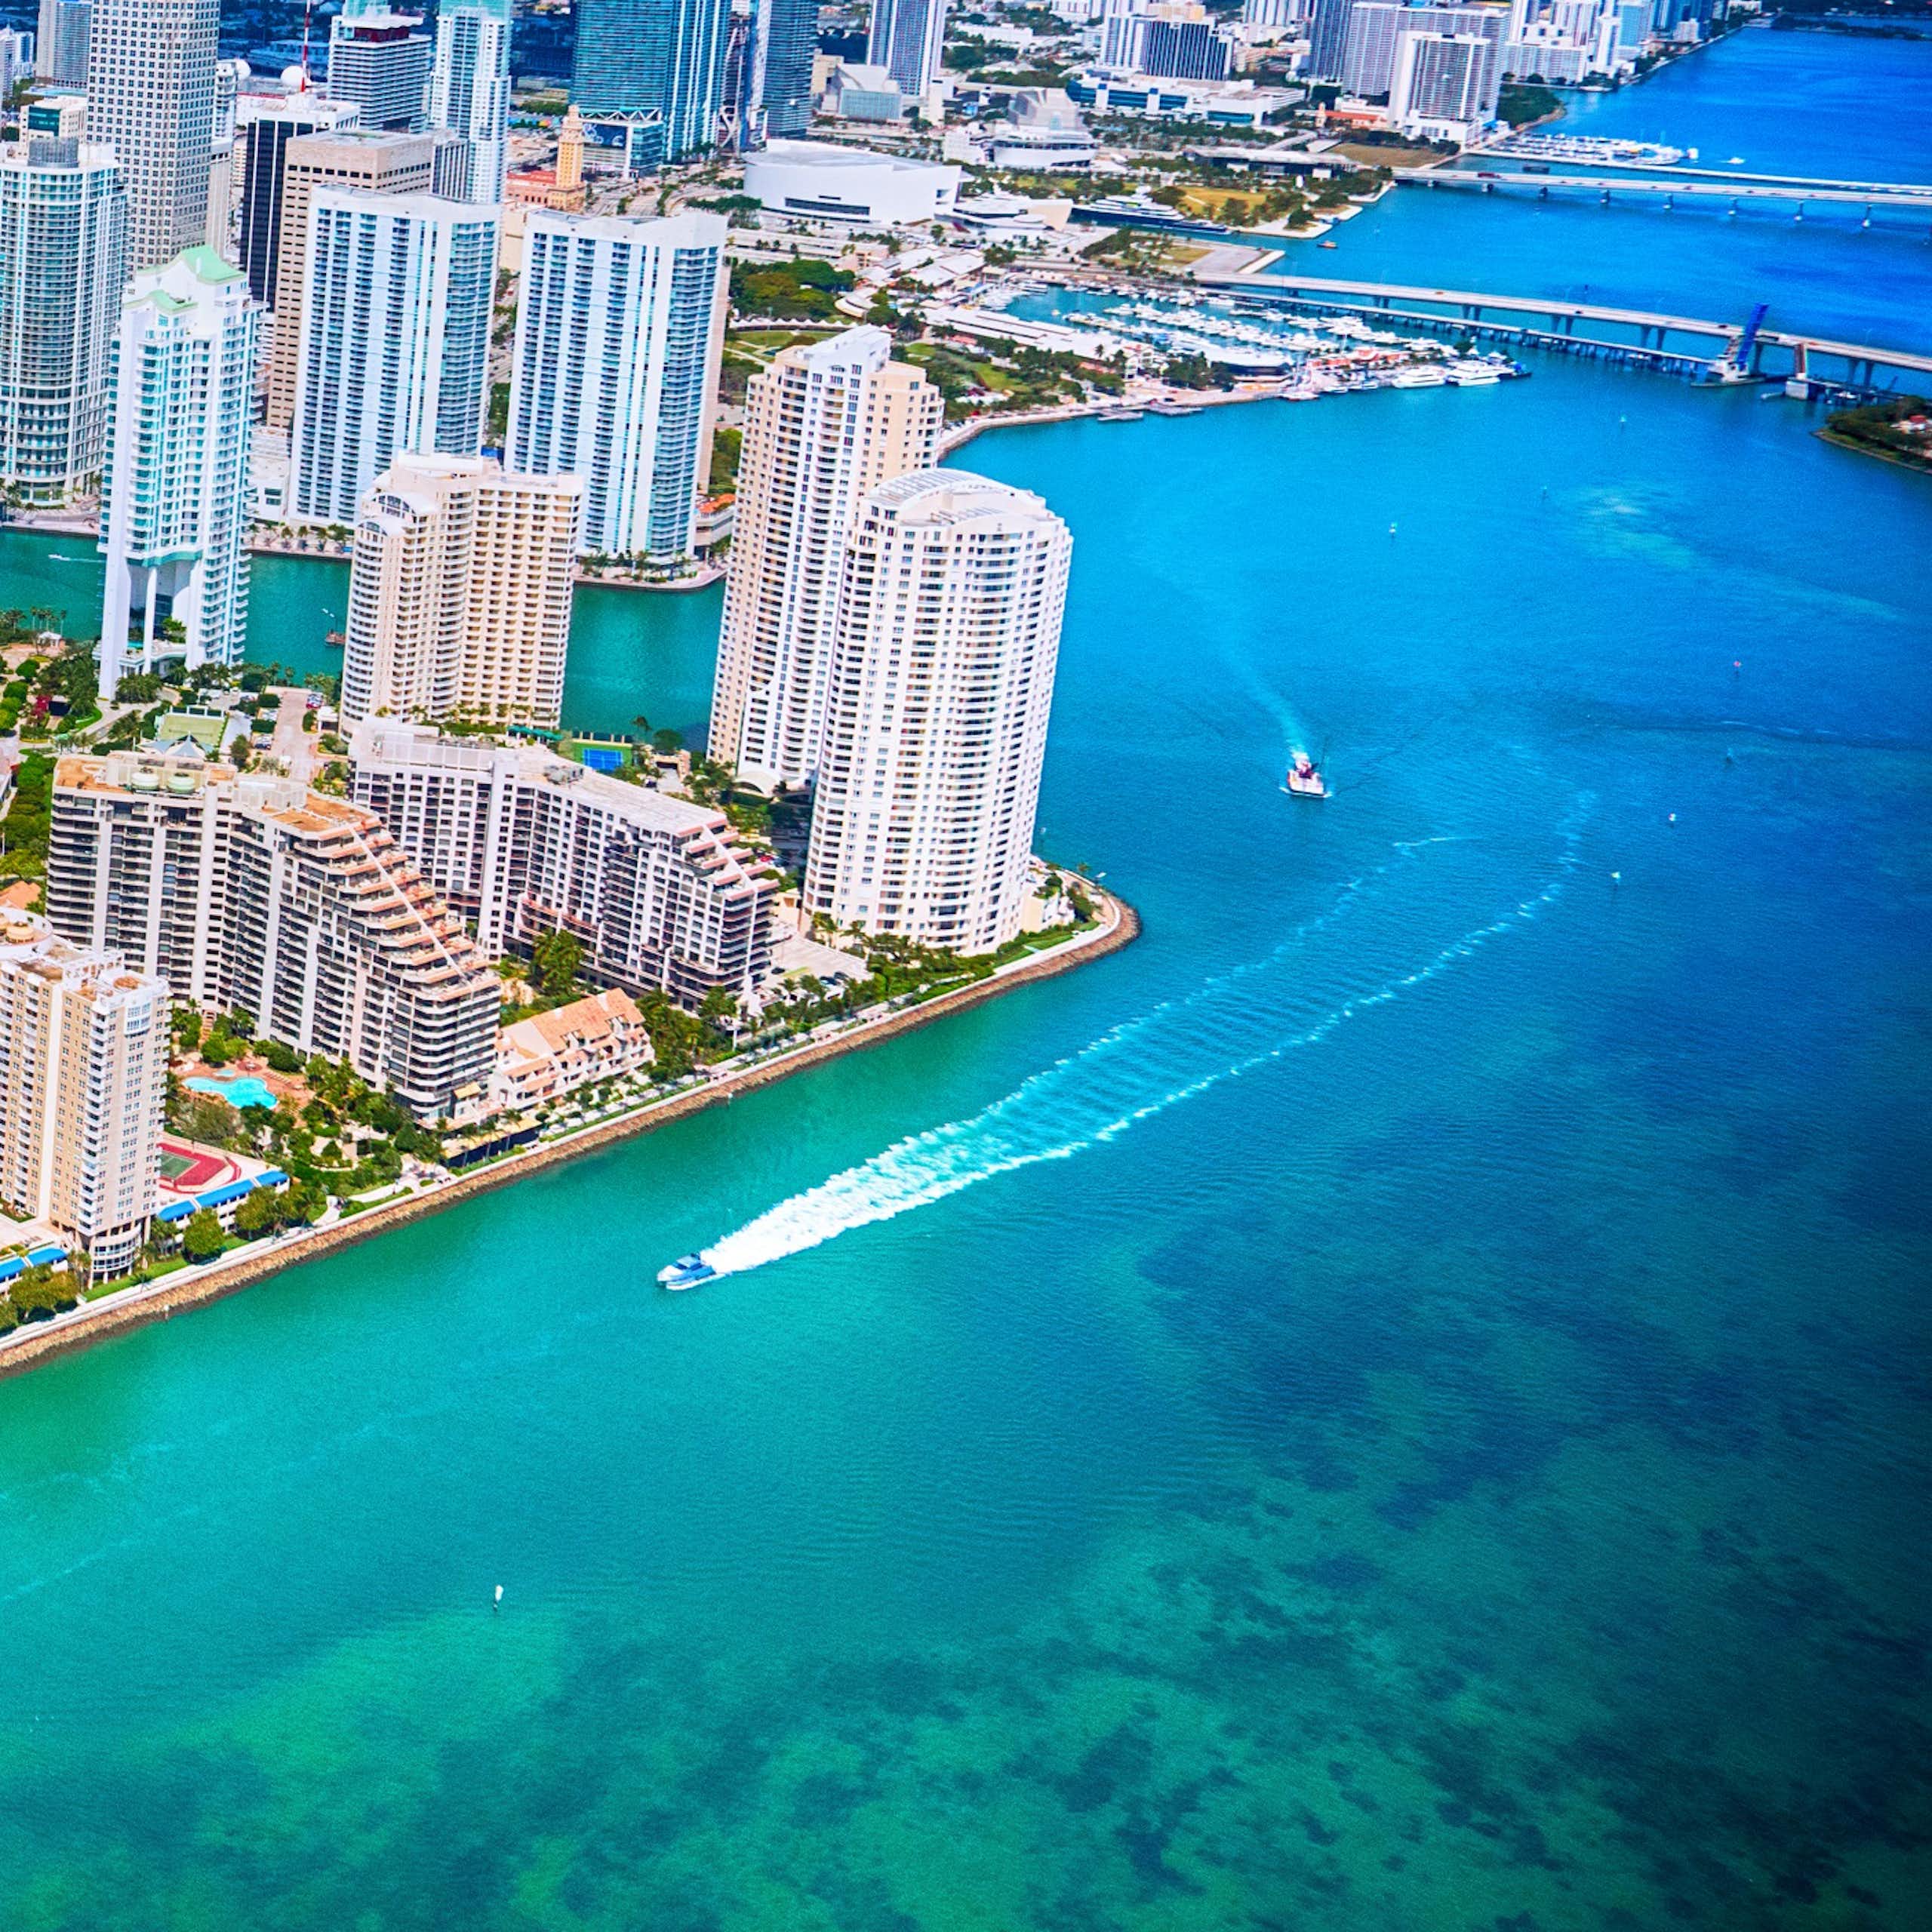 A helicopter of view of Miami's gleaming office towers over Biscayne Bay, where boats are running through the channels.